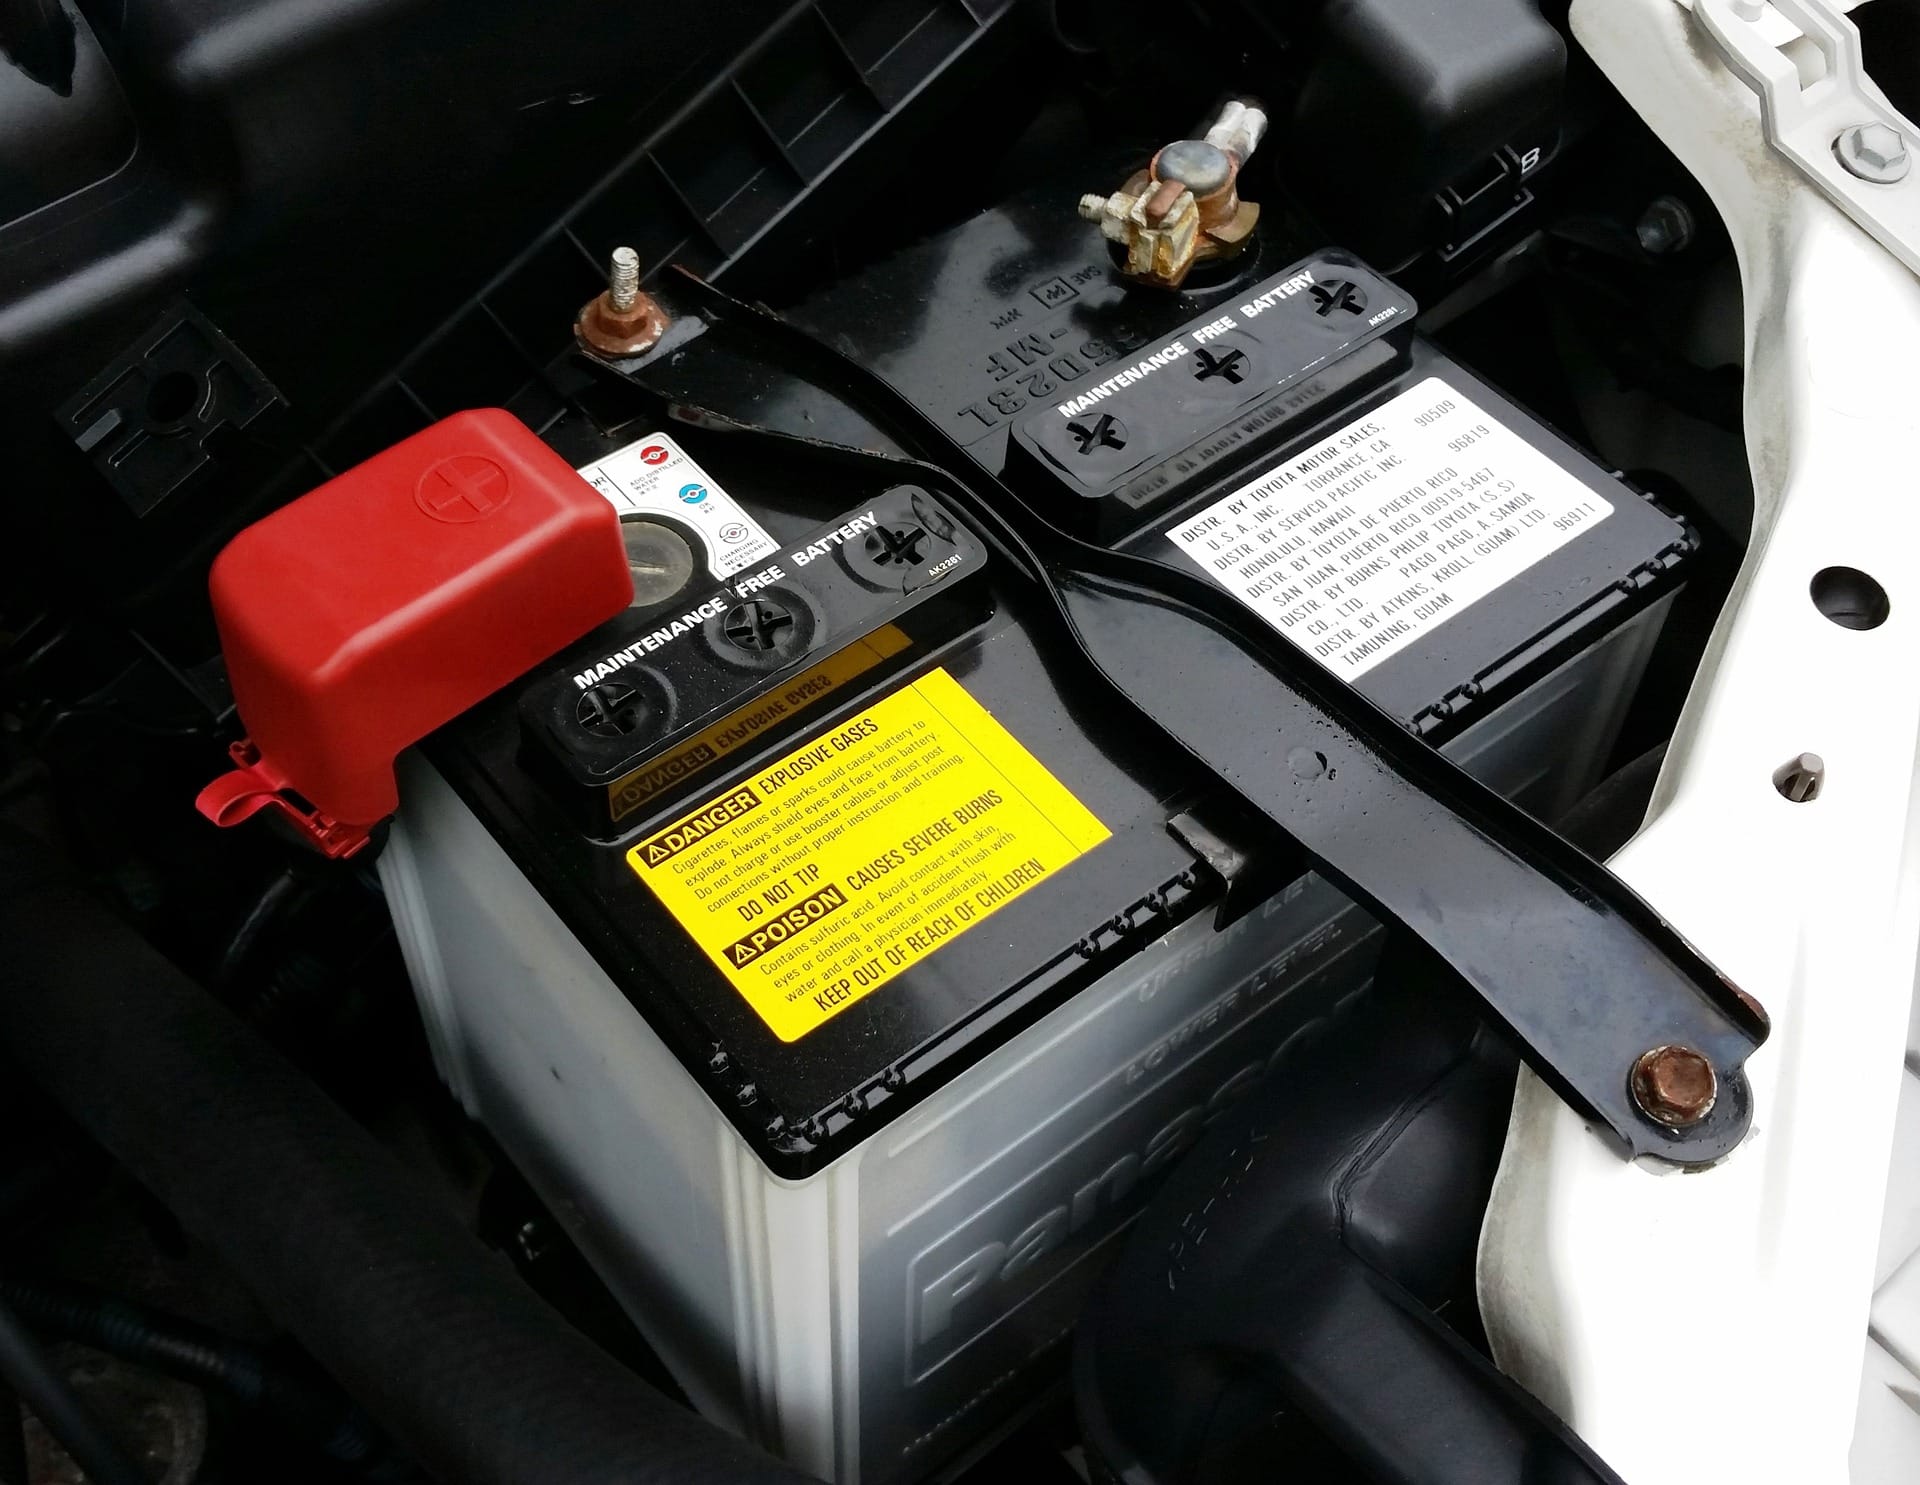 What Causes Corrosion on a Car Battery? Car Battery Corrosion Prevention So Your Engine Turns Over Every Time